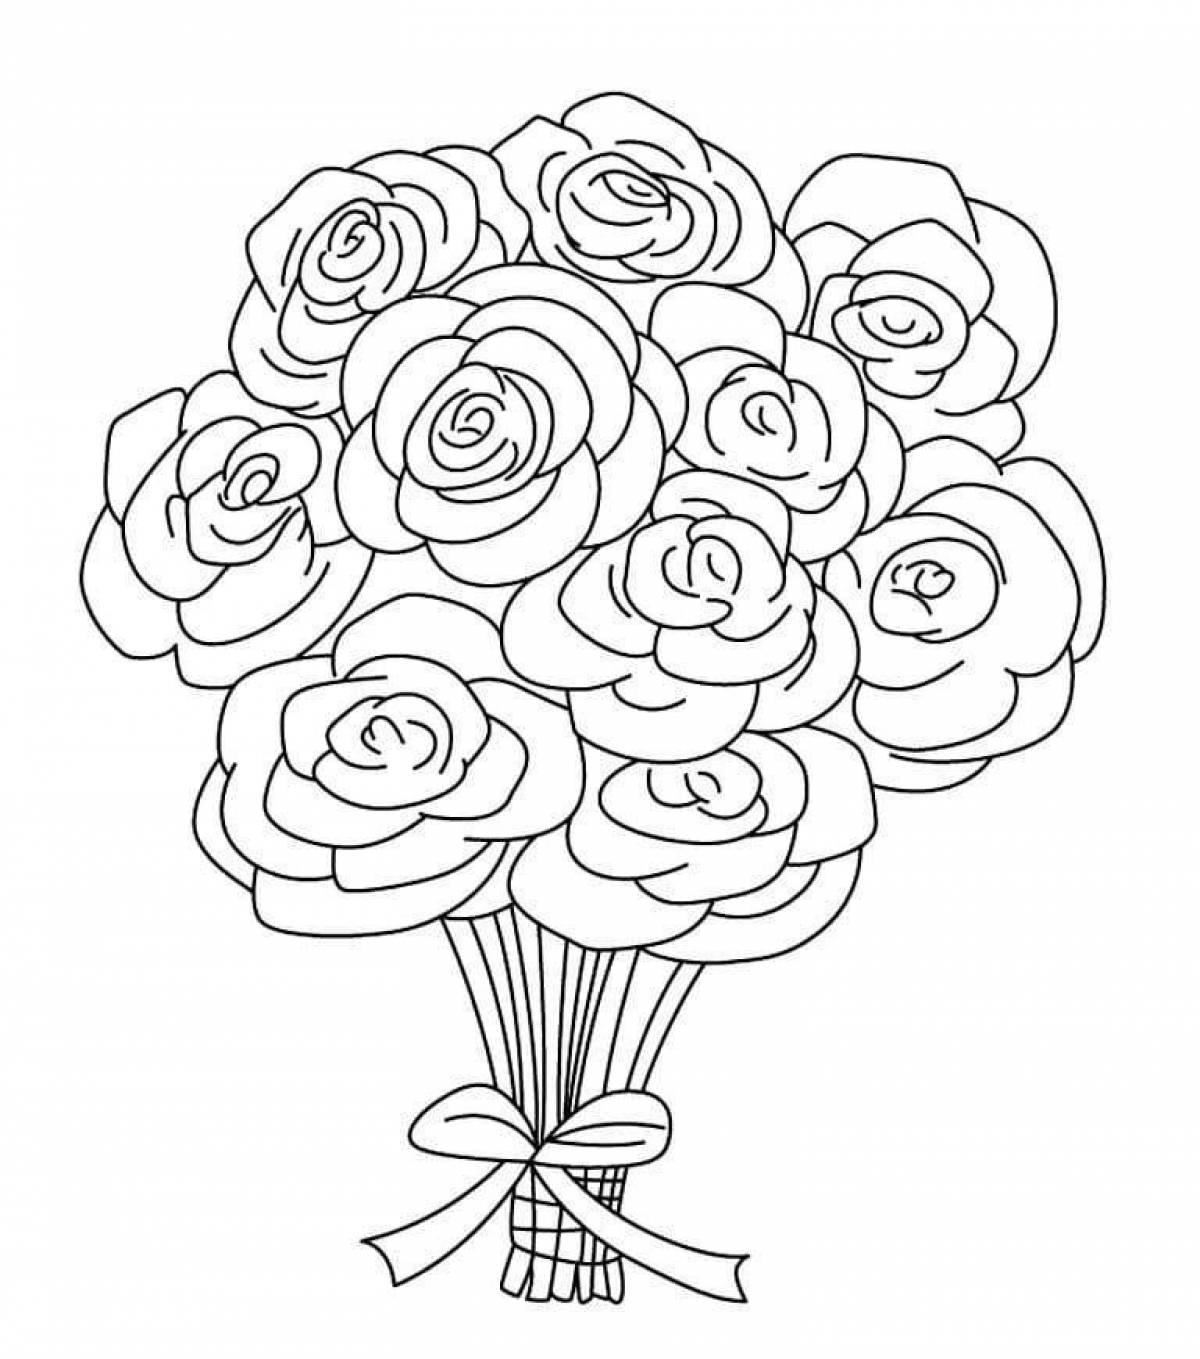 Coloring page graceful bouquet of roses